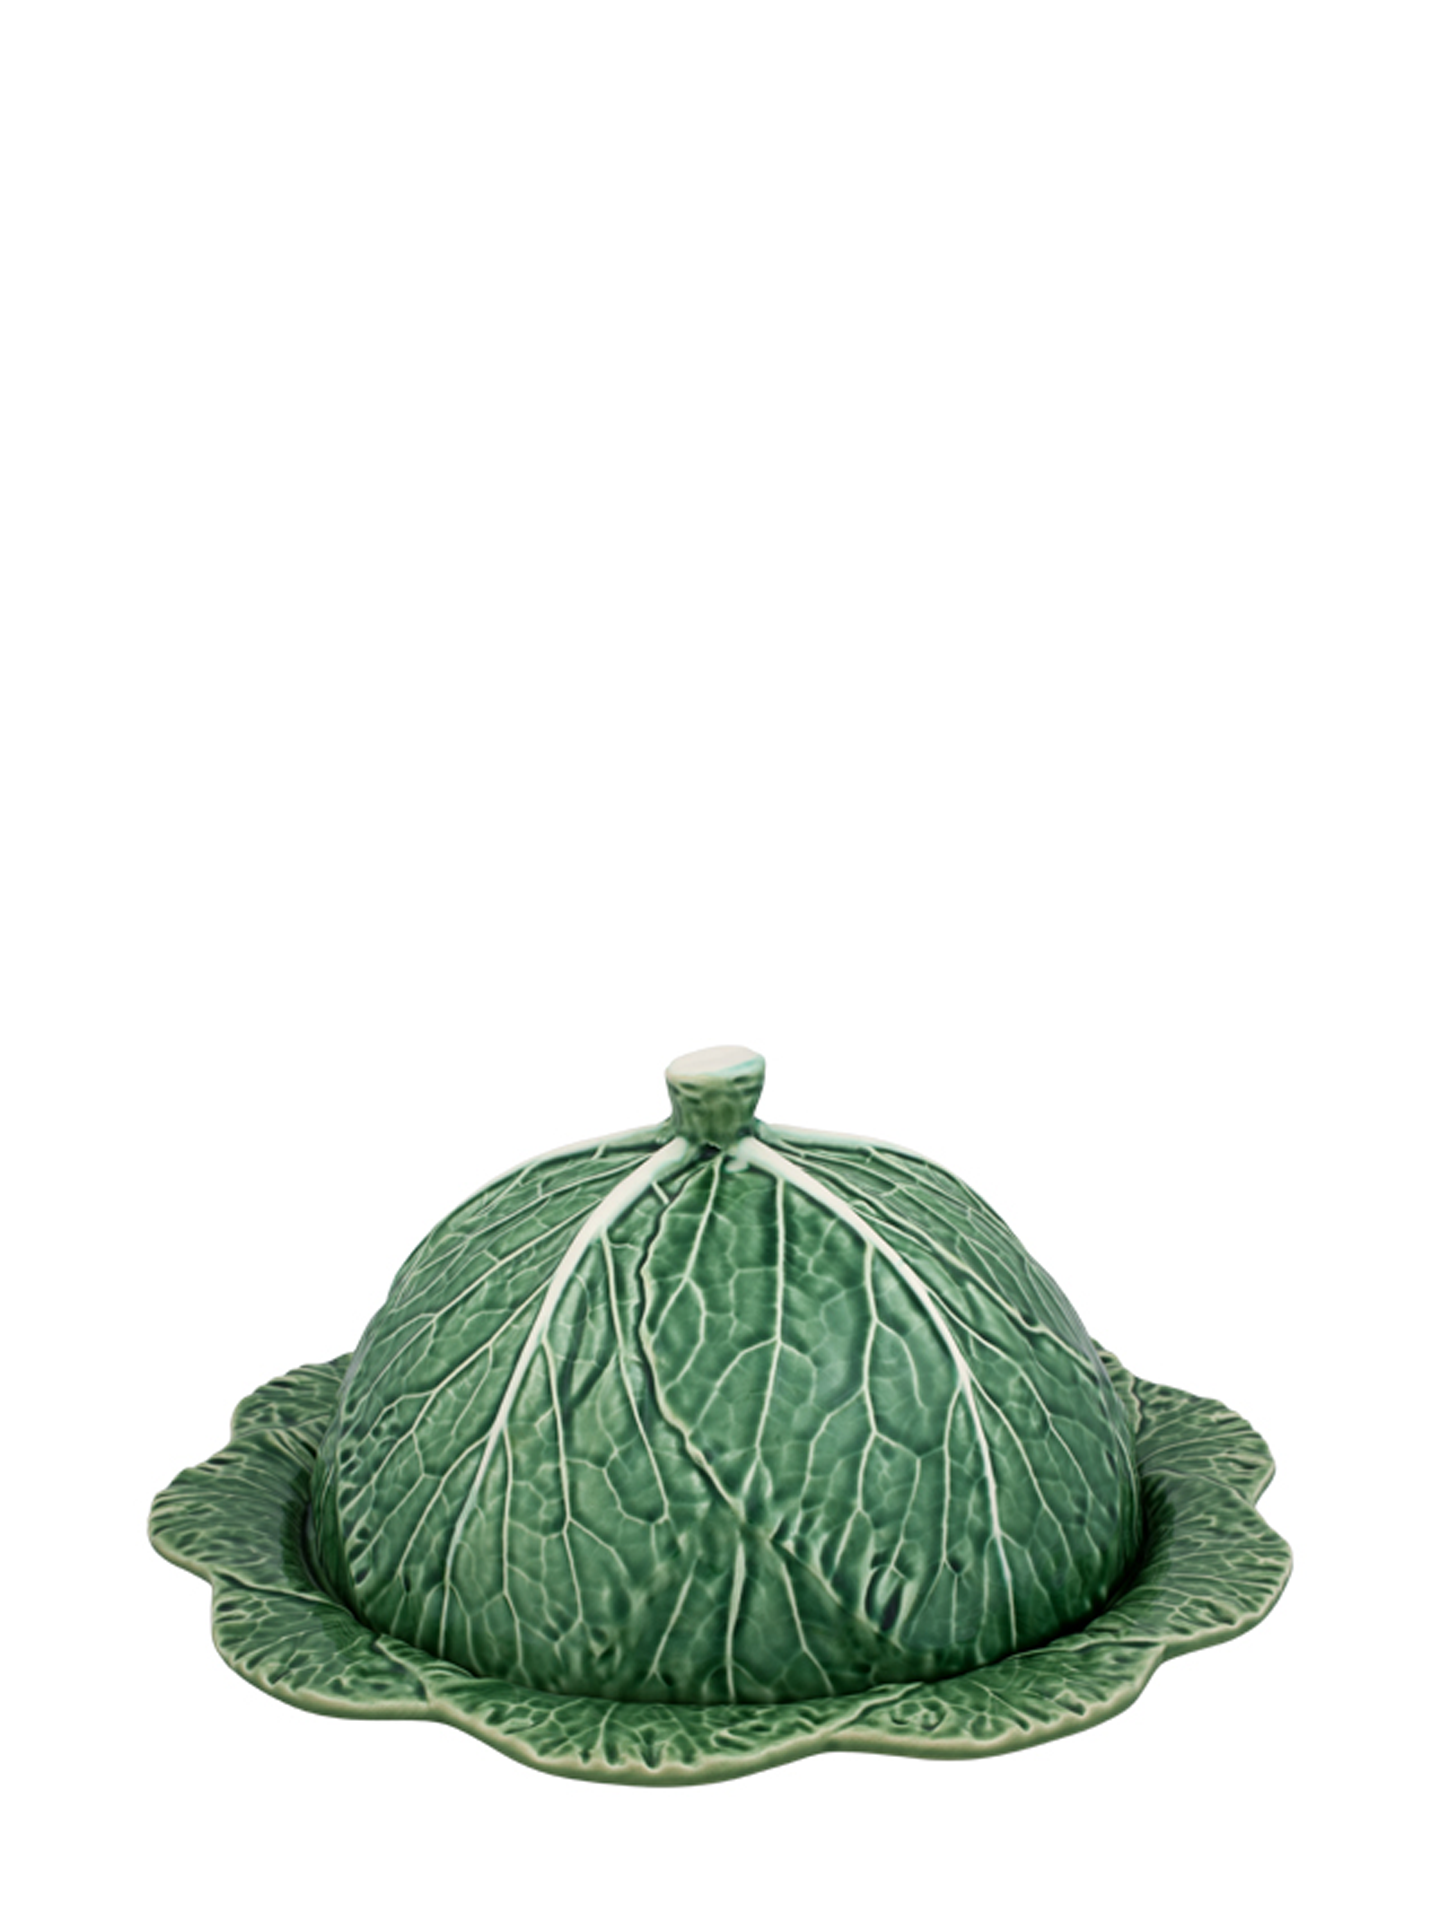 Round Cabbage Cheese Tray, green